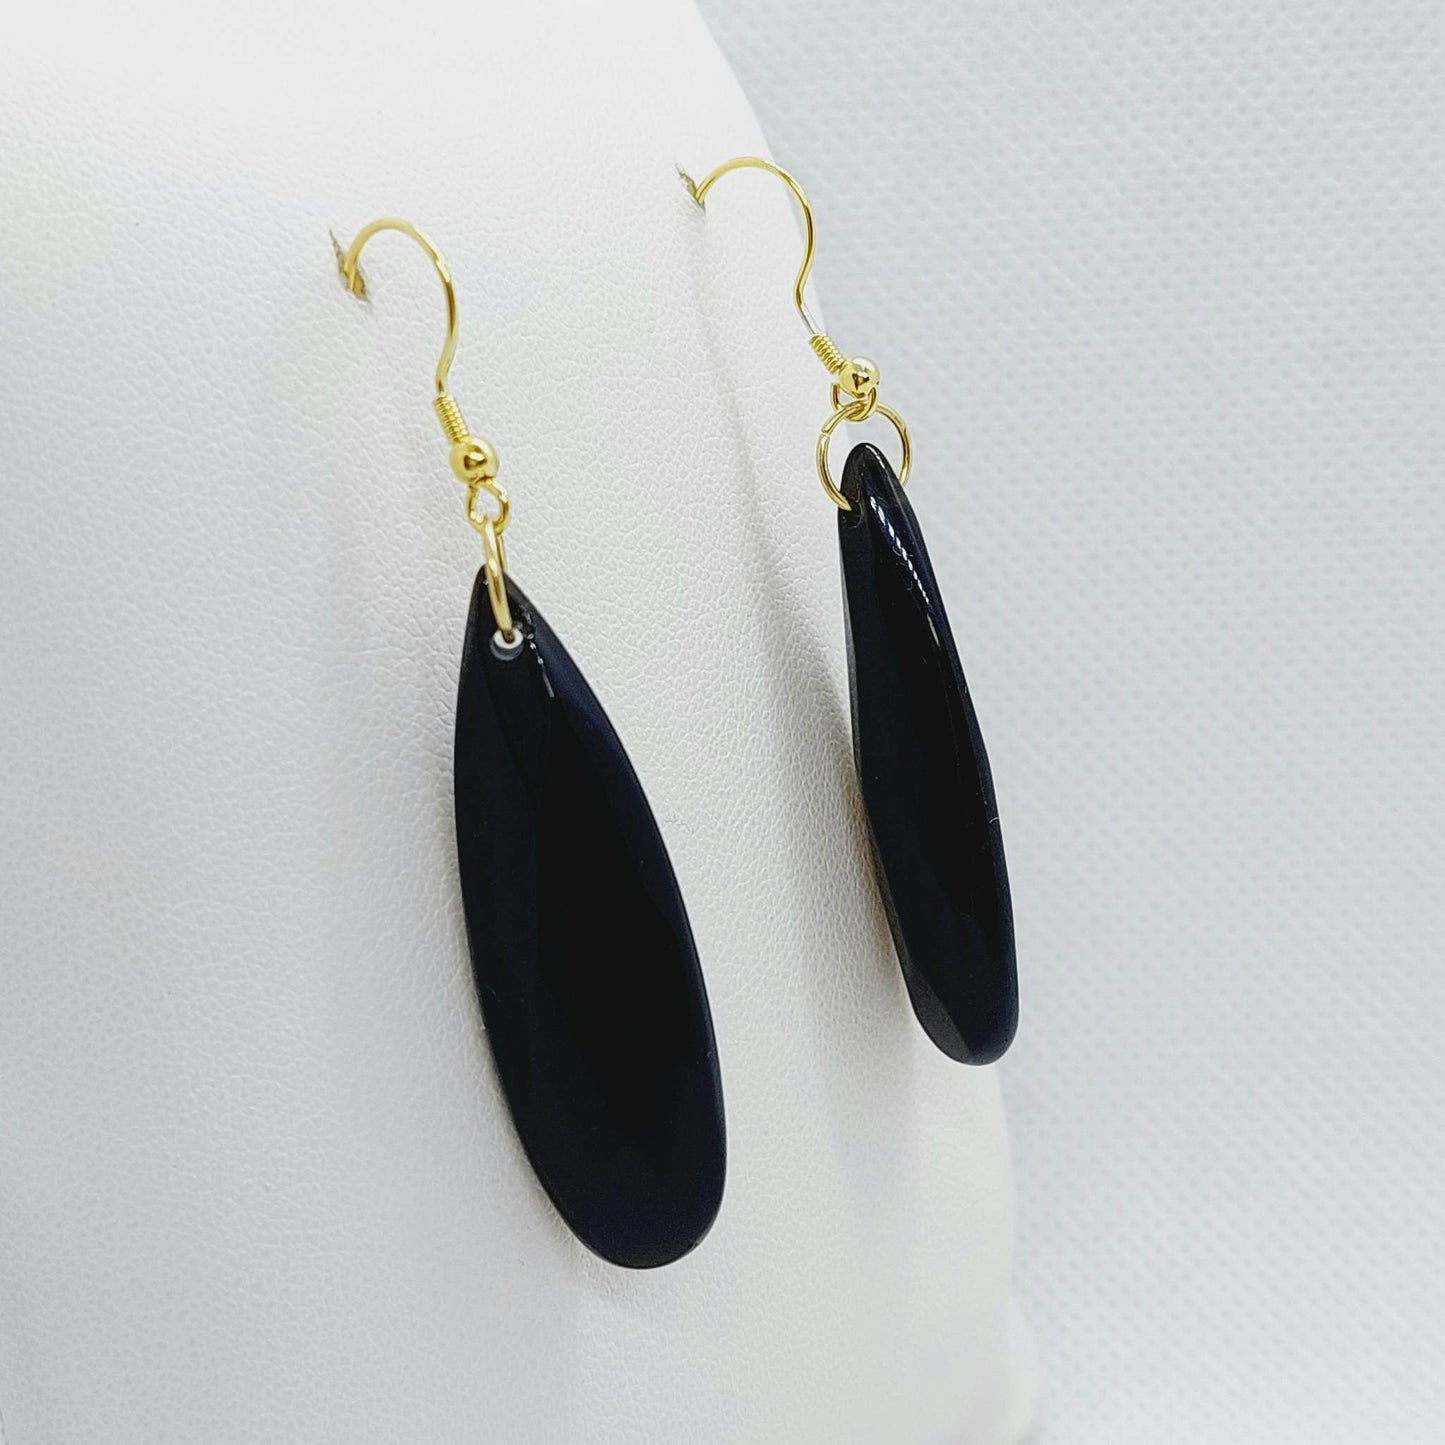 Natural Obsidian Drop Earrings - Stainless Steel Gold Plated